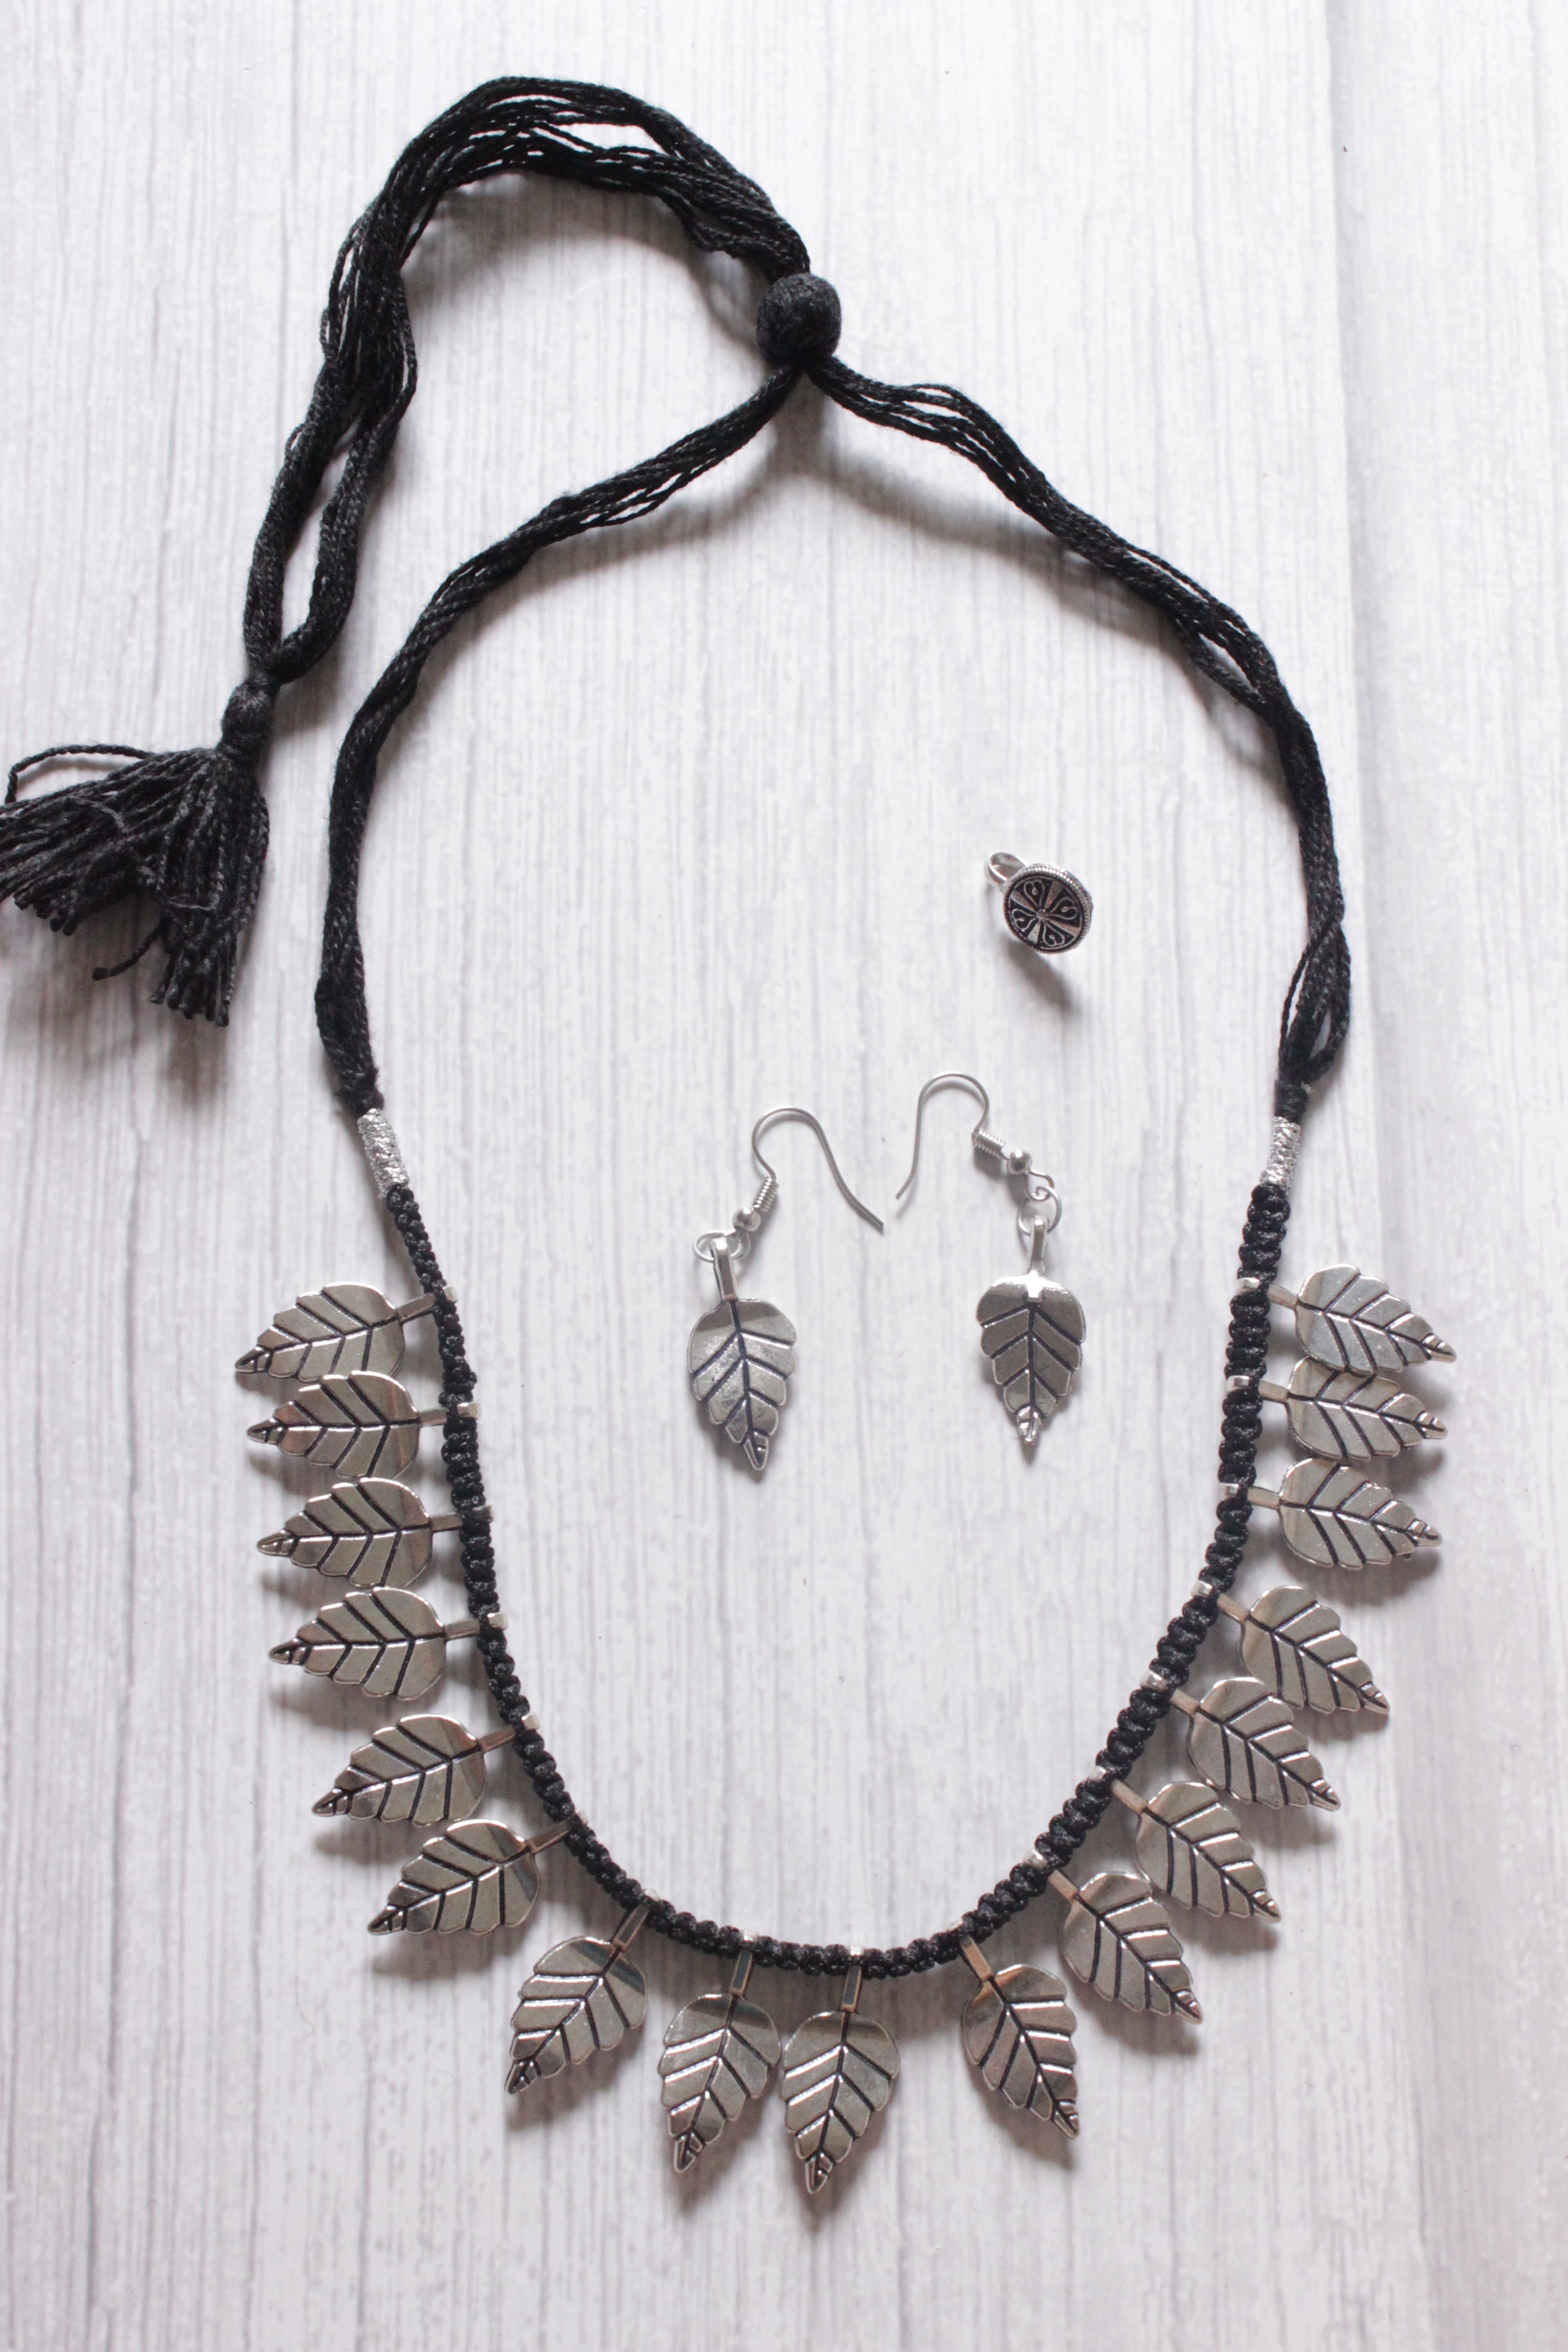 Set of 3 Leaf Motif Black Beads Braided Necklace Set with Nosepin